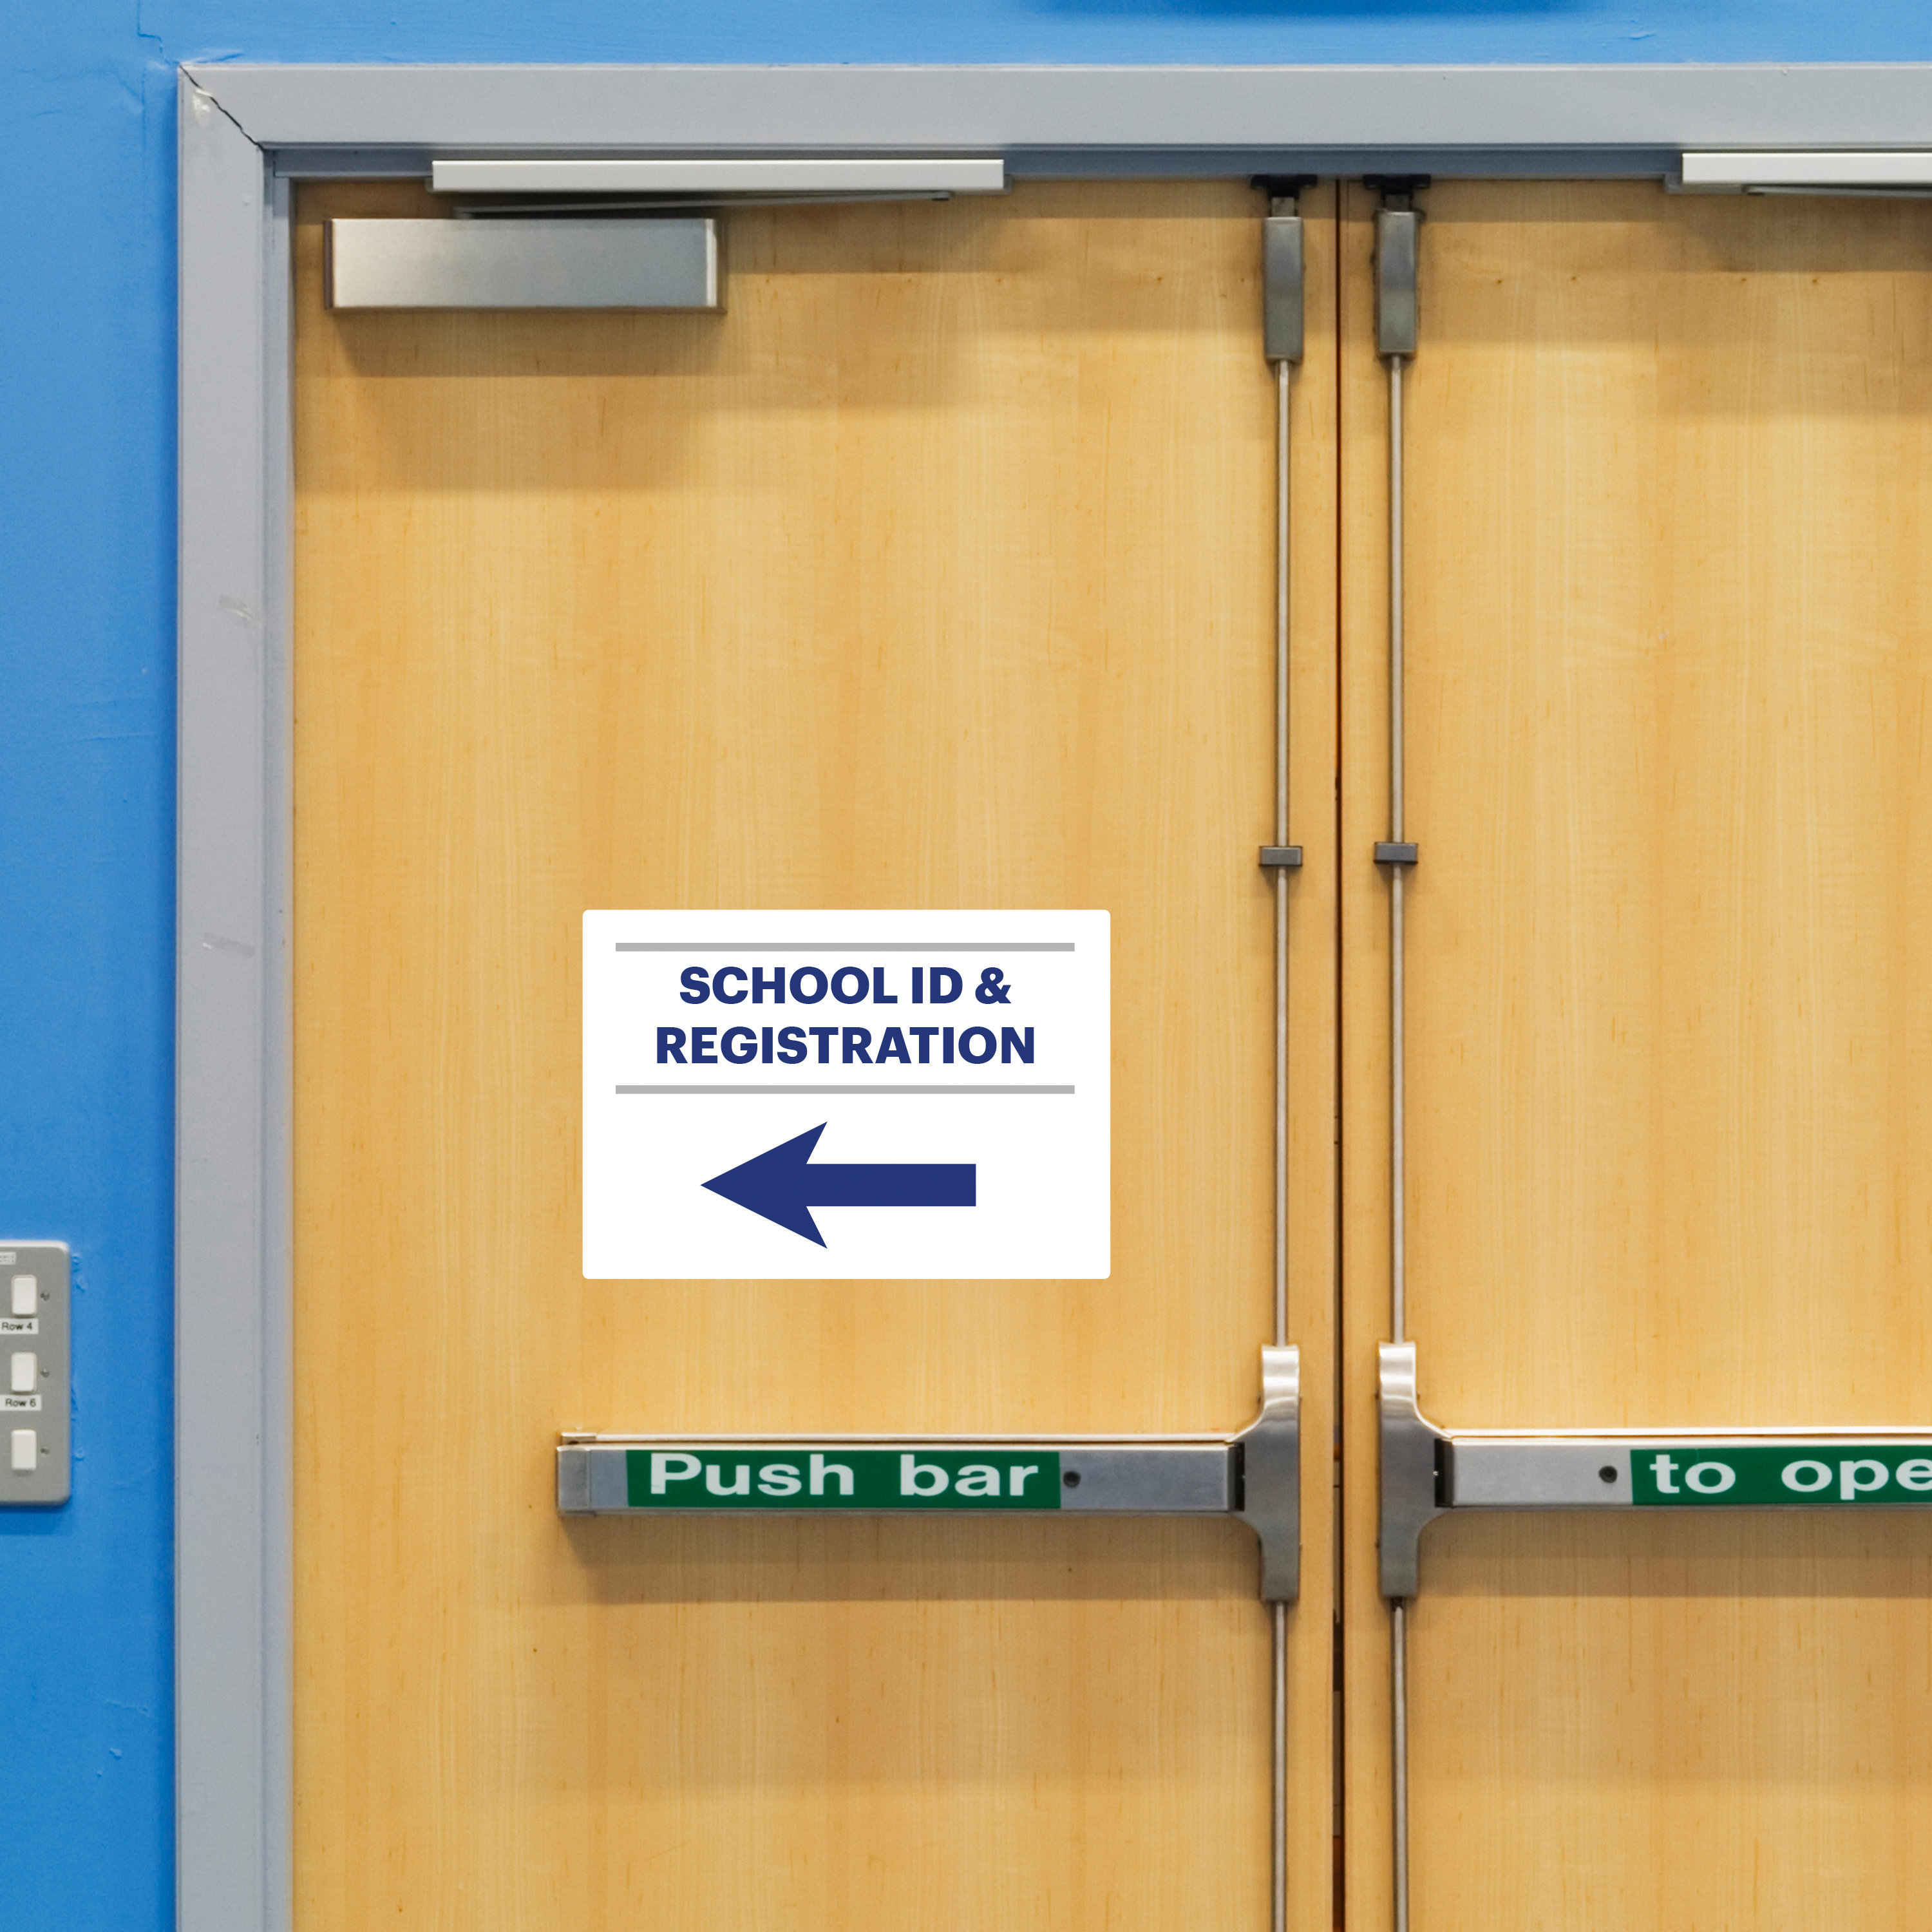 An example of a directional sign which reads "School ID & Registration" with a large arrow pointing to the left. The sign is printed on Avery 61515 removable sign labels designed for doors and walls. 